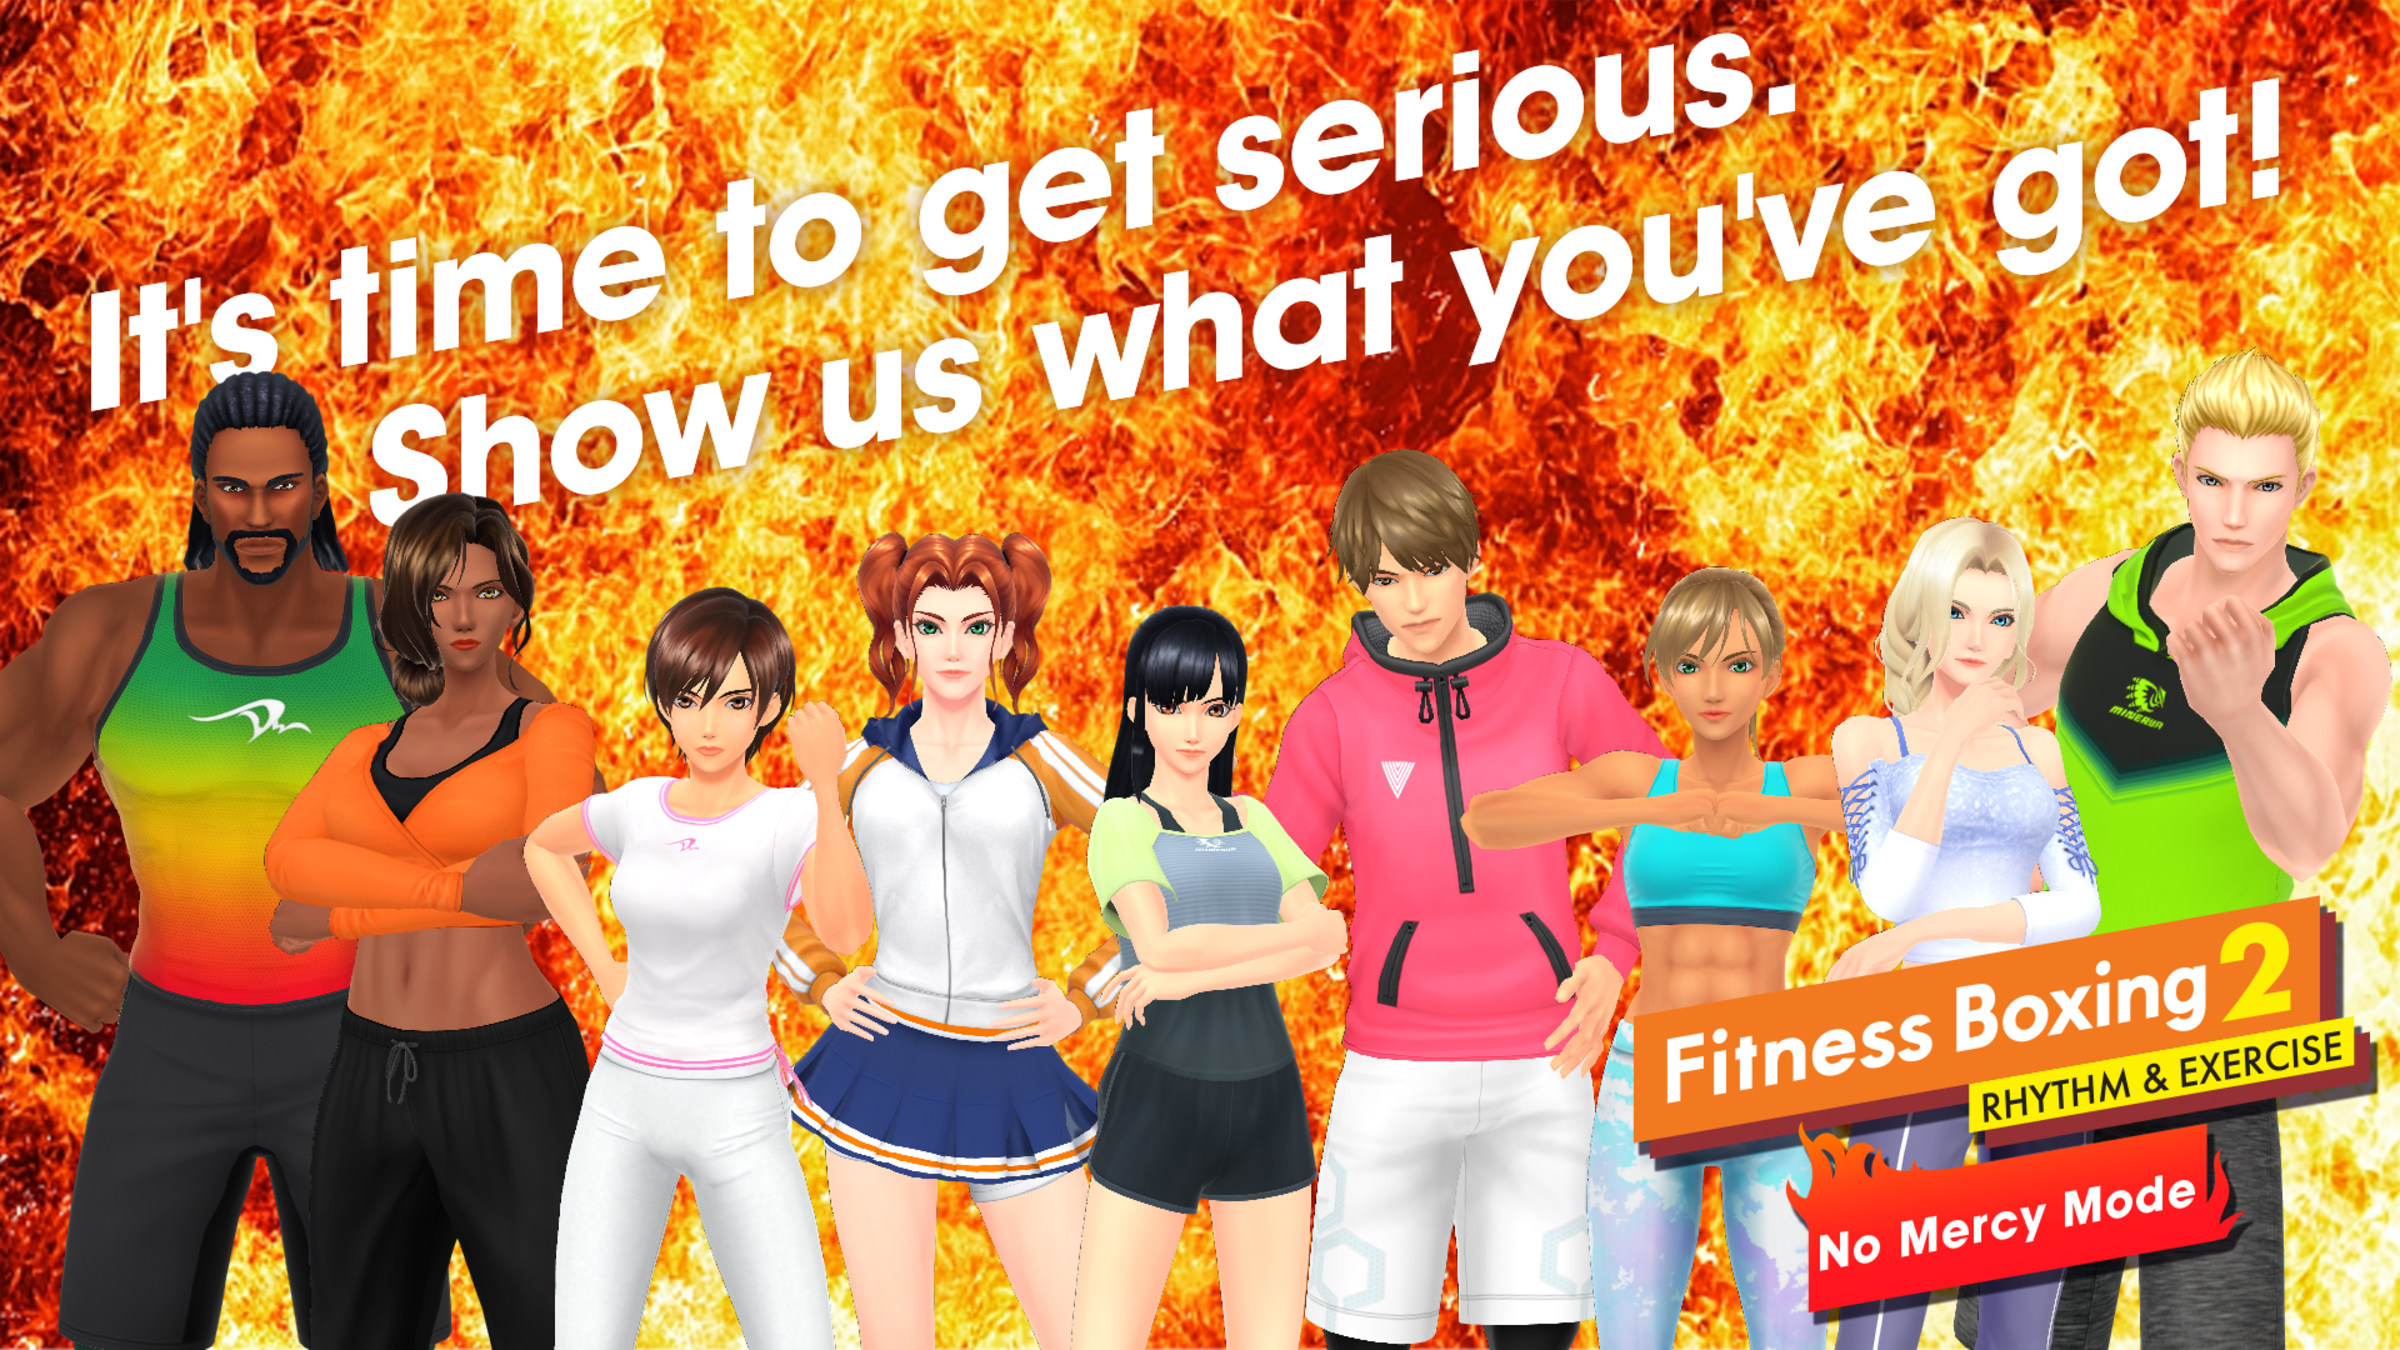 Site Exercise All Switch Mercy Fitness - & intensity: instructors for 2: Boxing Rhythm No Official Nintendo Nintendo